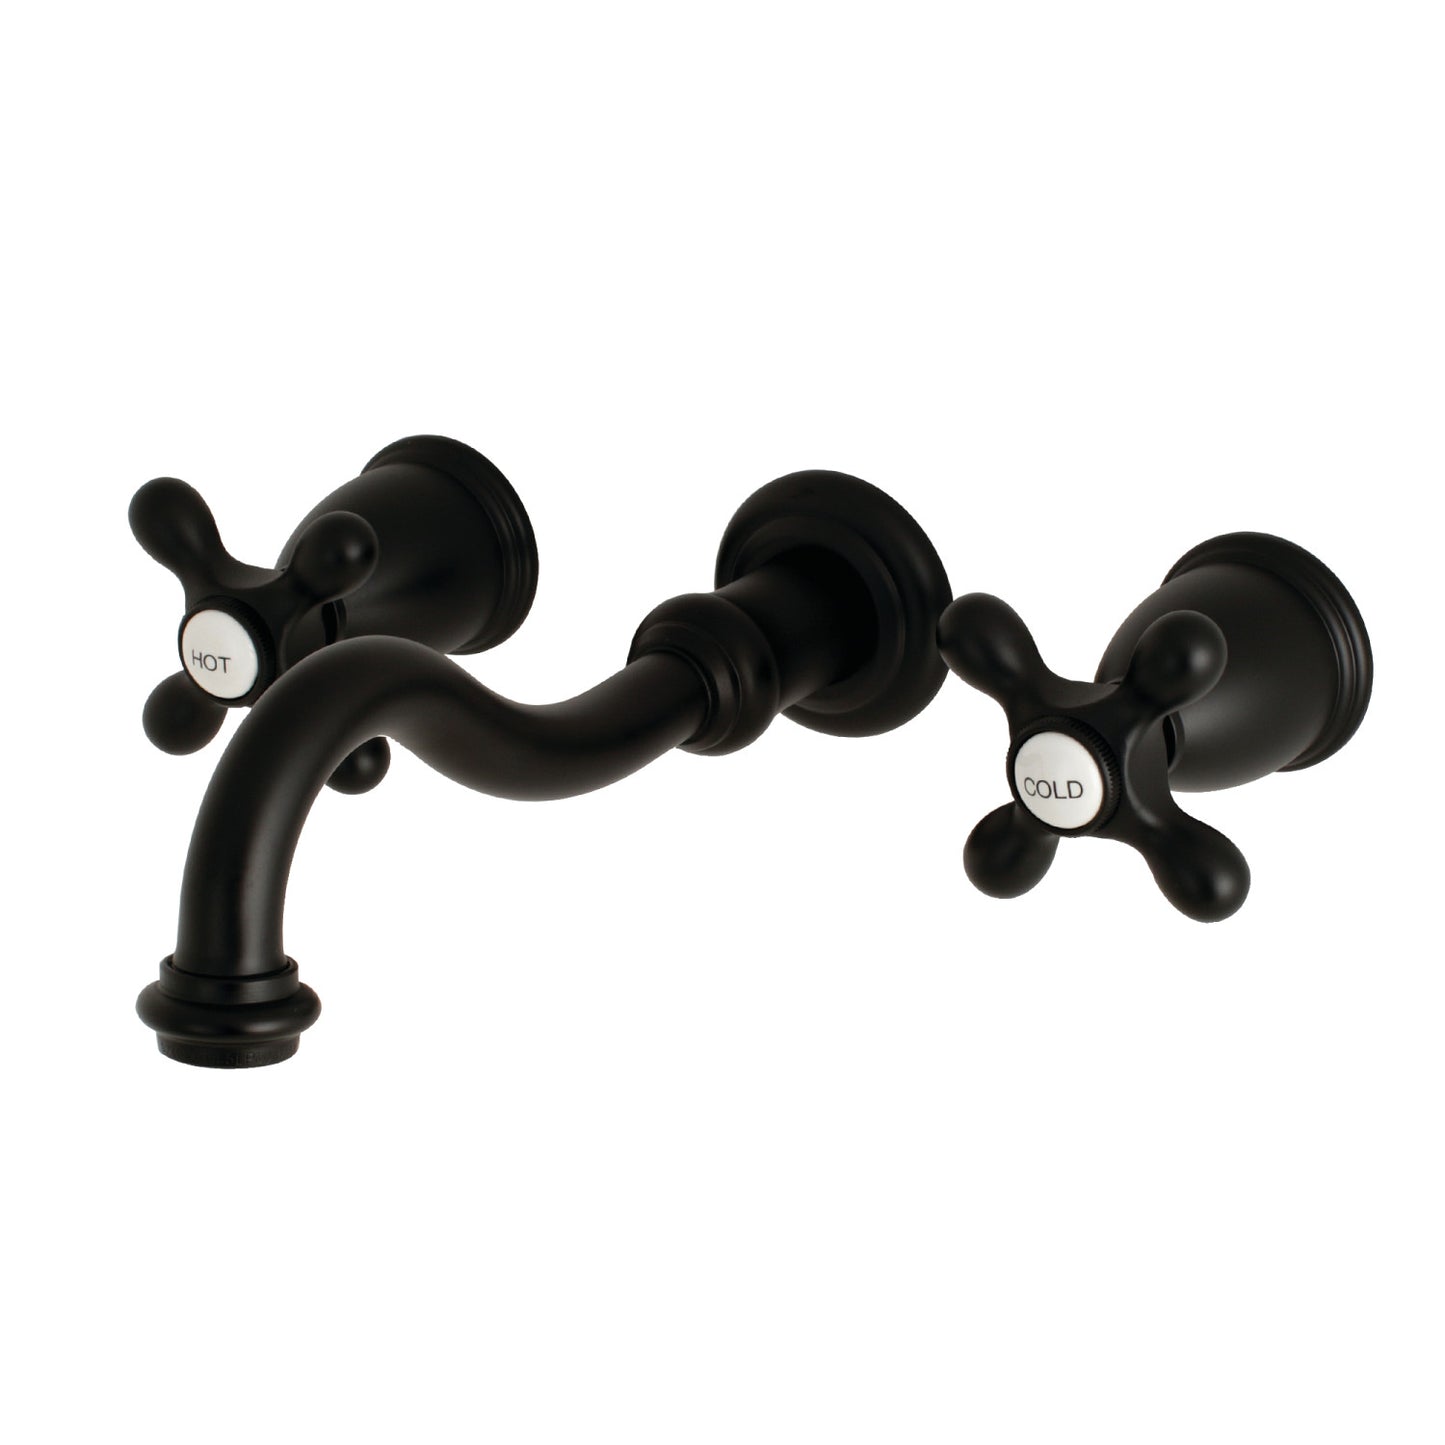 Vintage Wall Mount Sink Faucet with Cross Handle, Matte Black